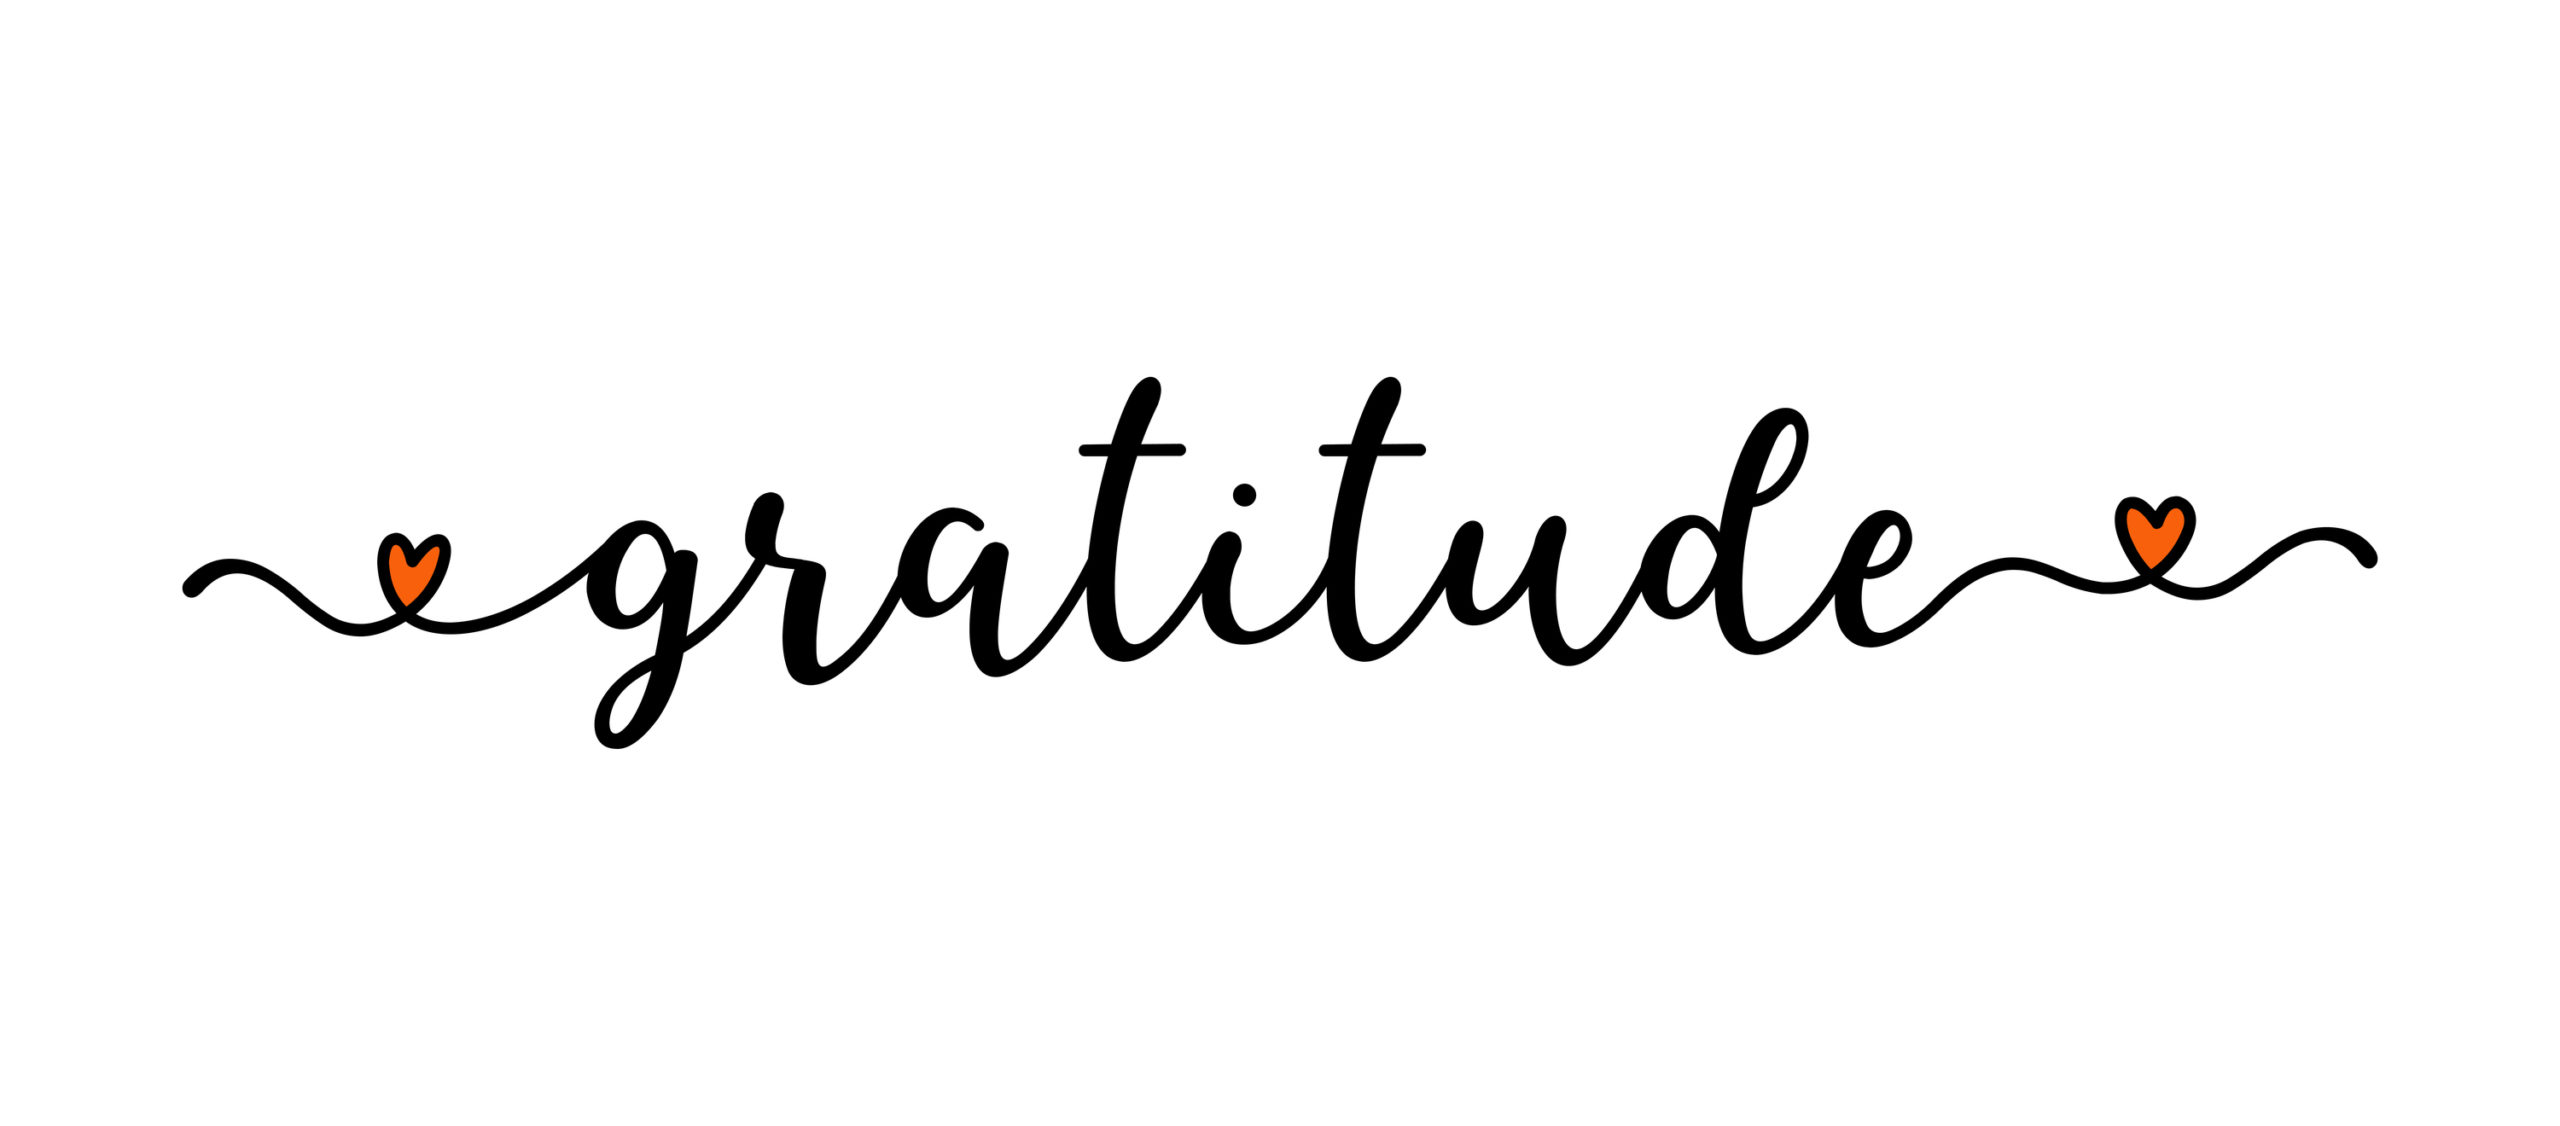 How to be grateful